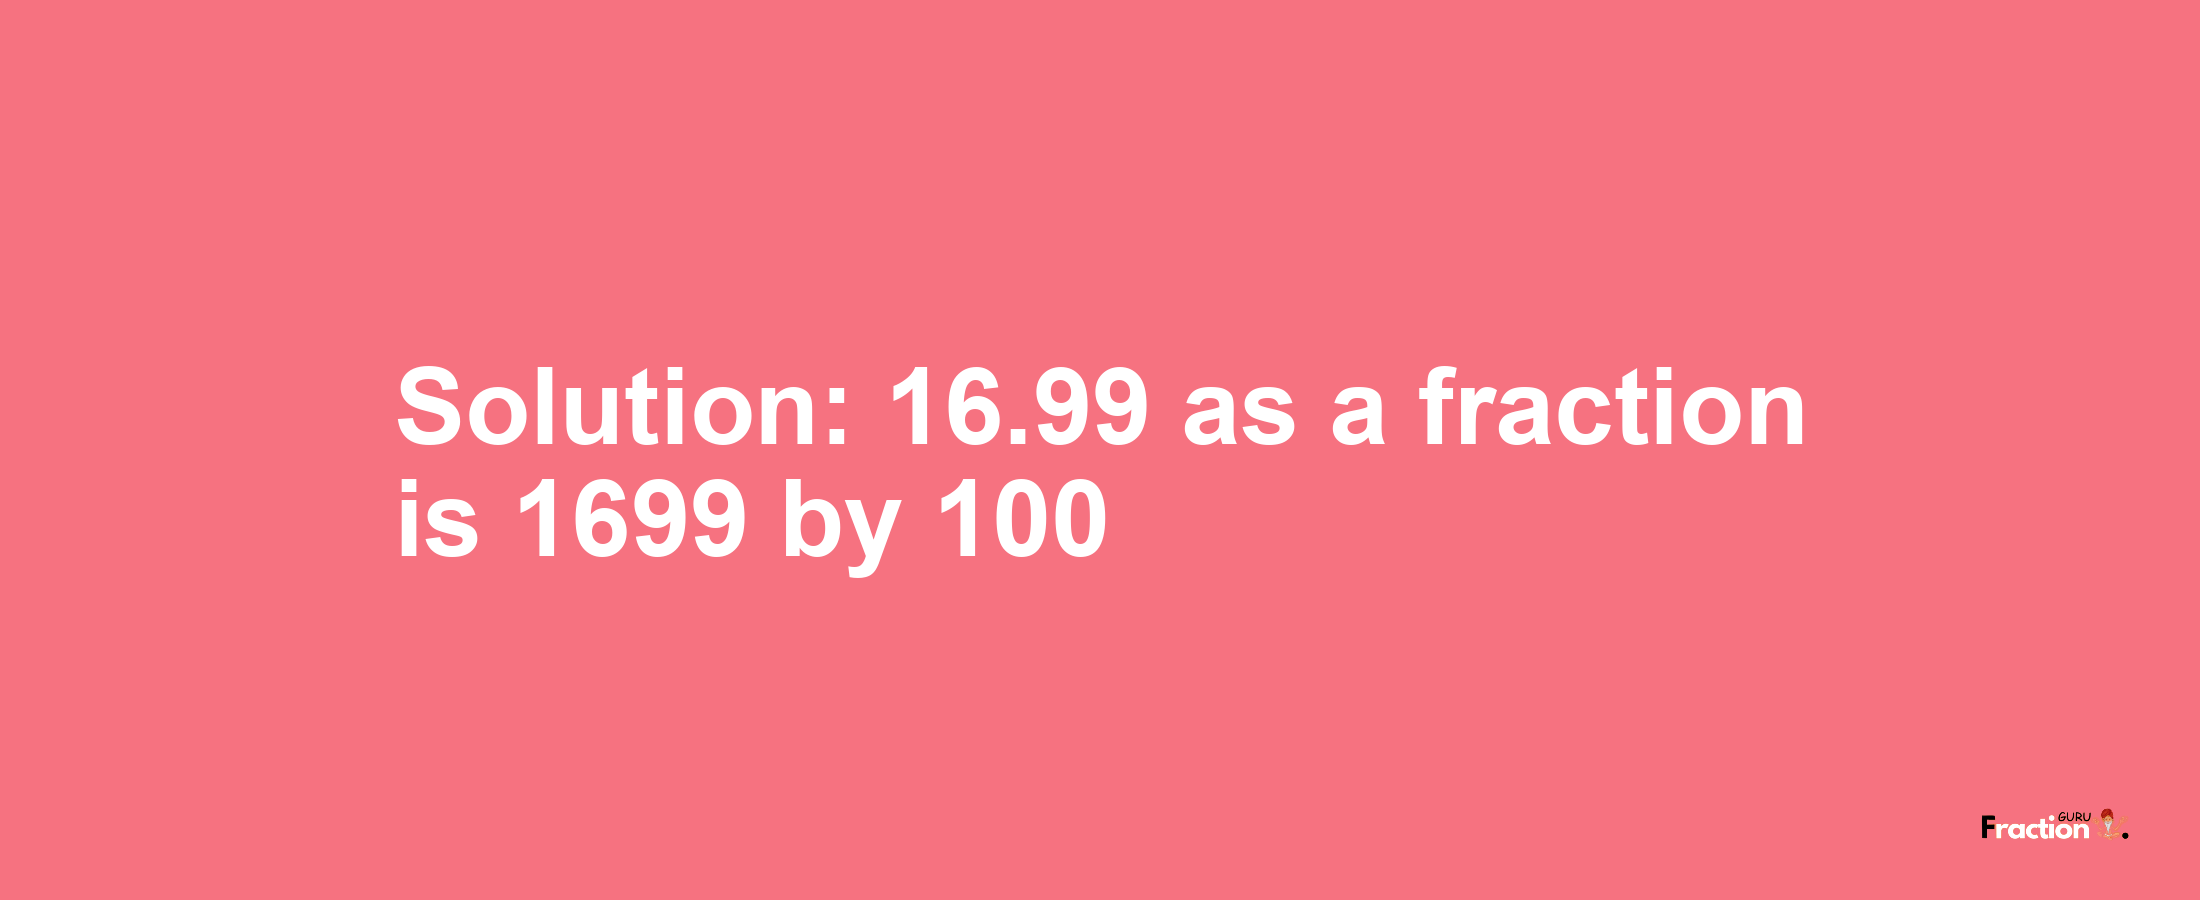 Solution:16.99 as a fraction is 1699/100